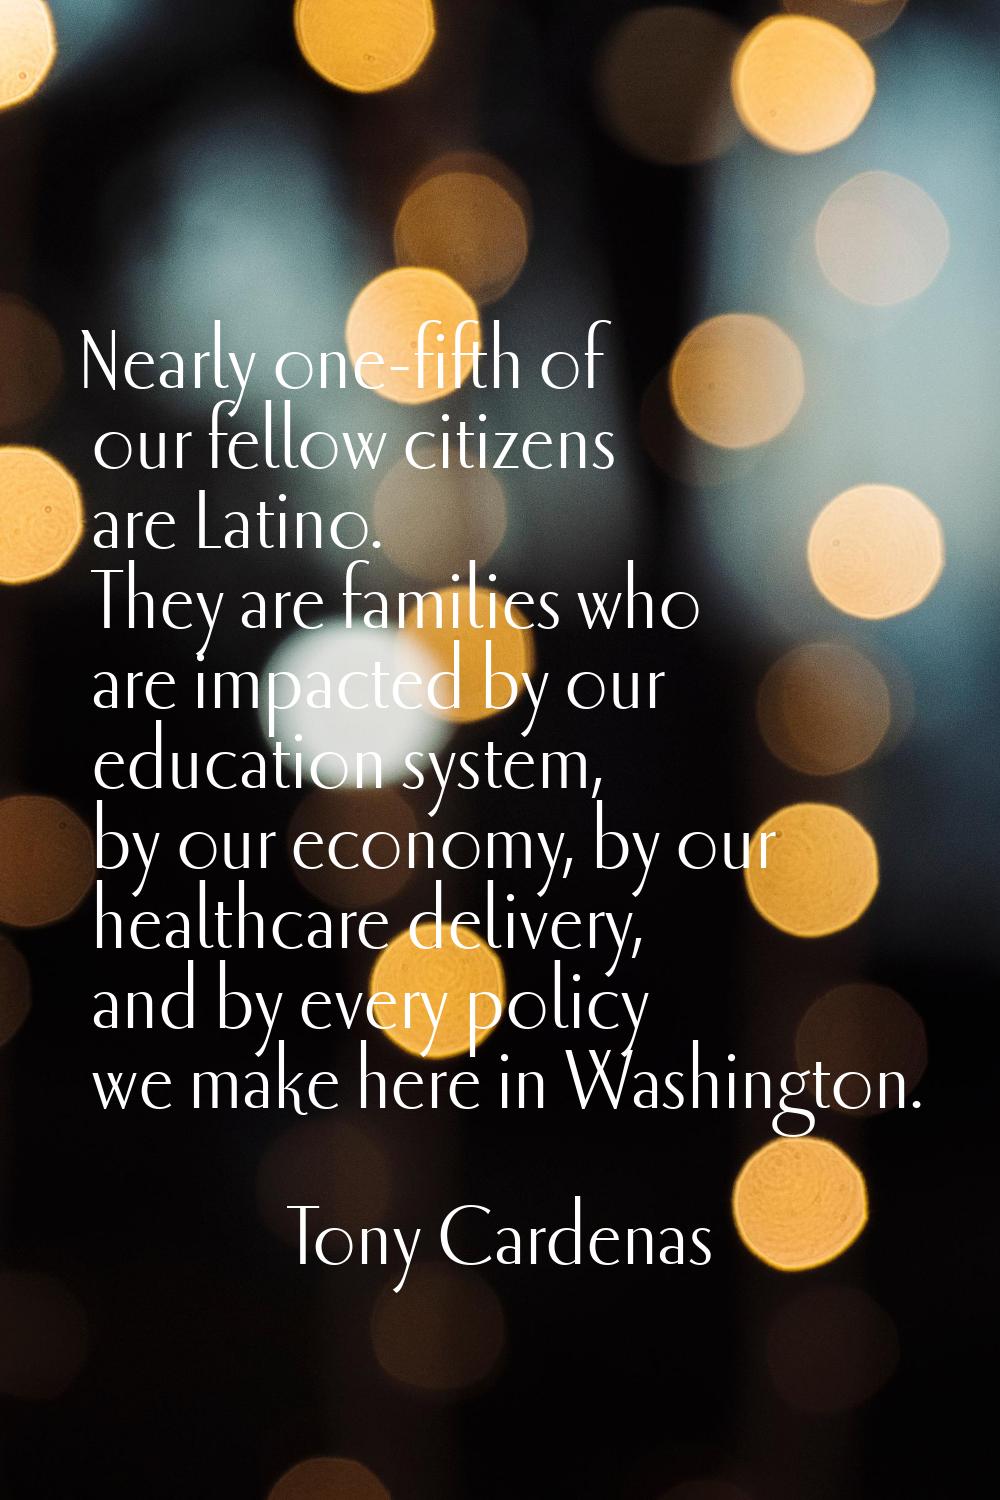 Nearly one-fifth of our fellow citizens are Latino. They are families who are impacted by our educa